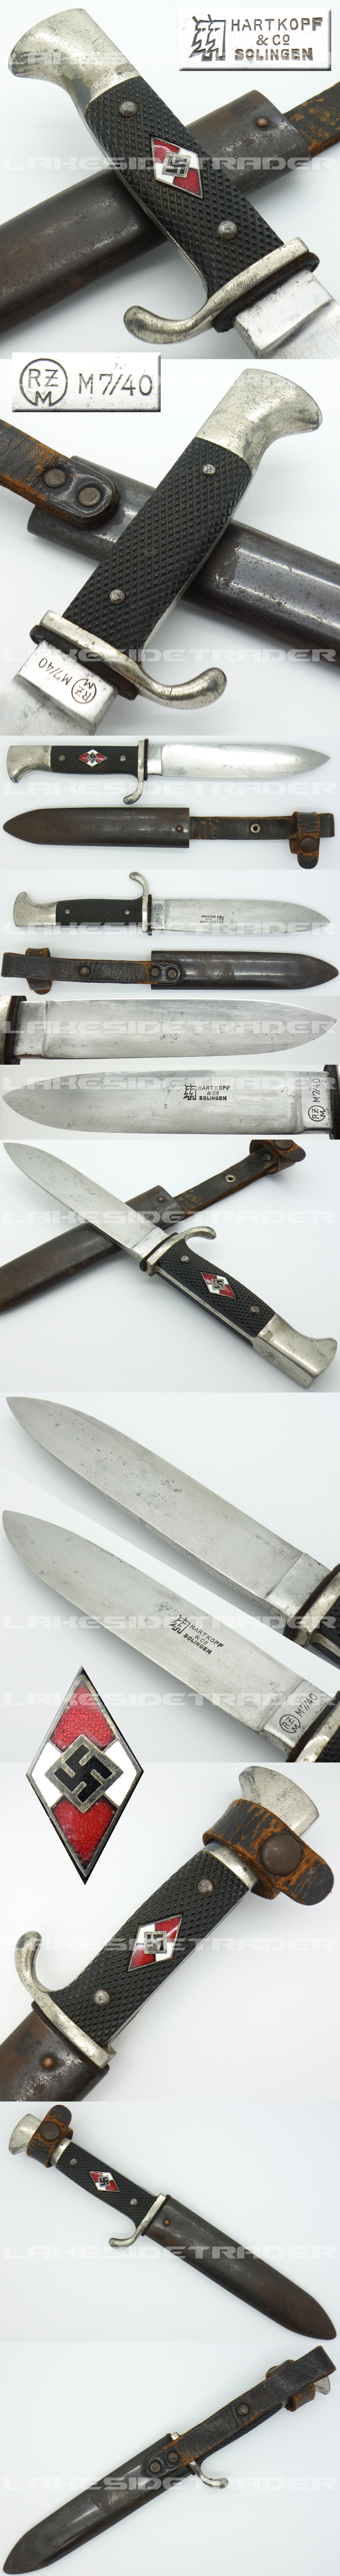 Transitional Hitler Youth Knife by Hartkopf & Co